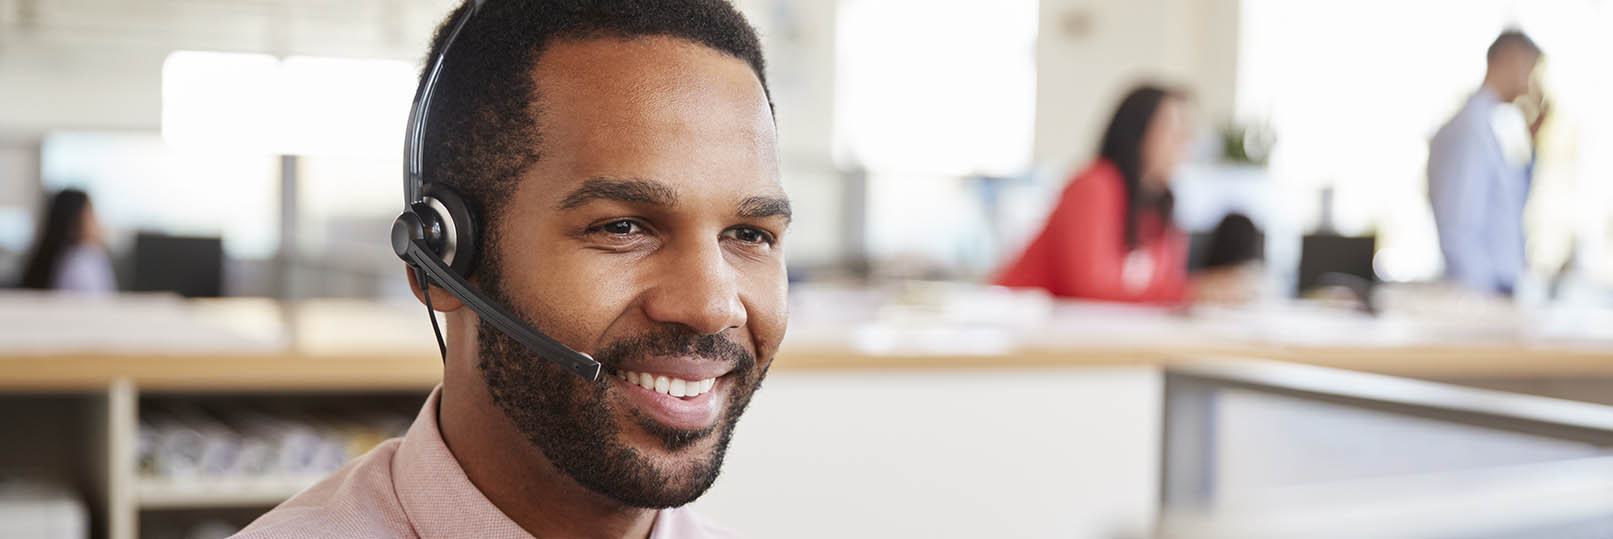 man in call center answering phone calls